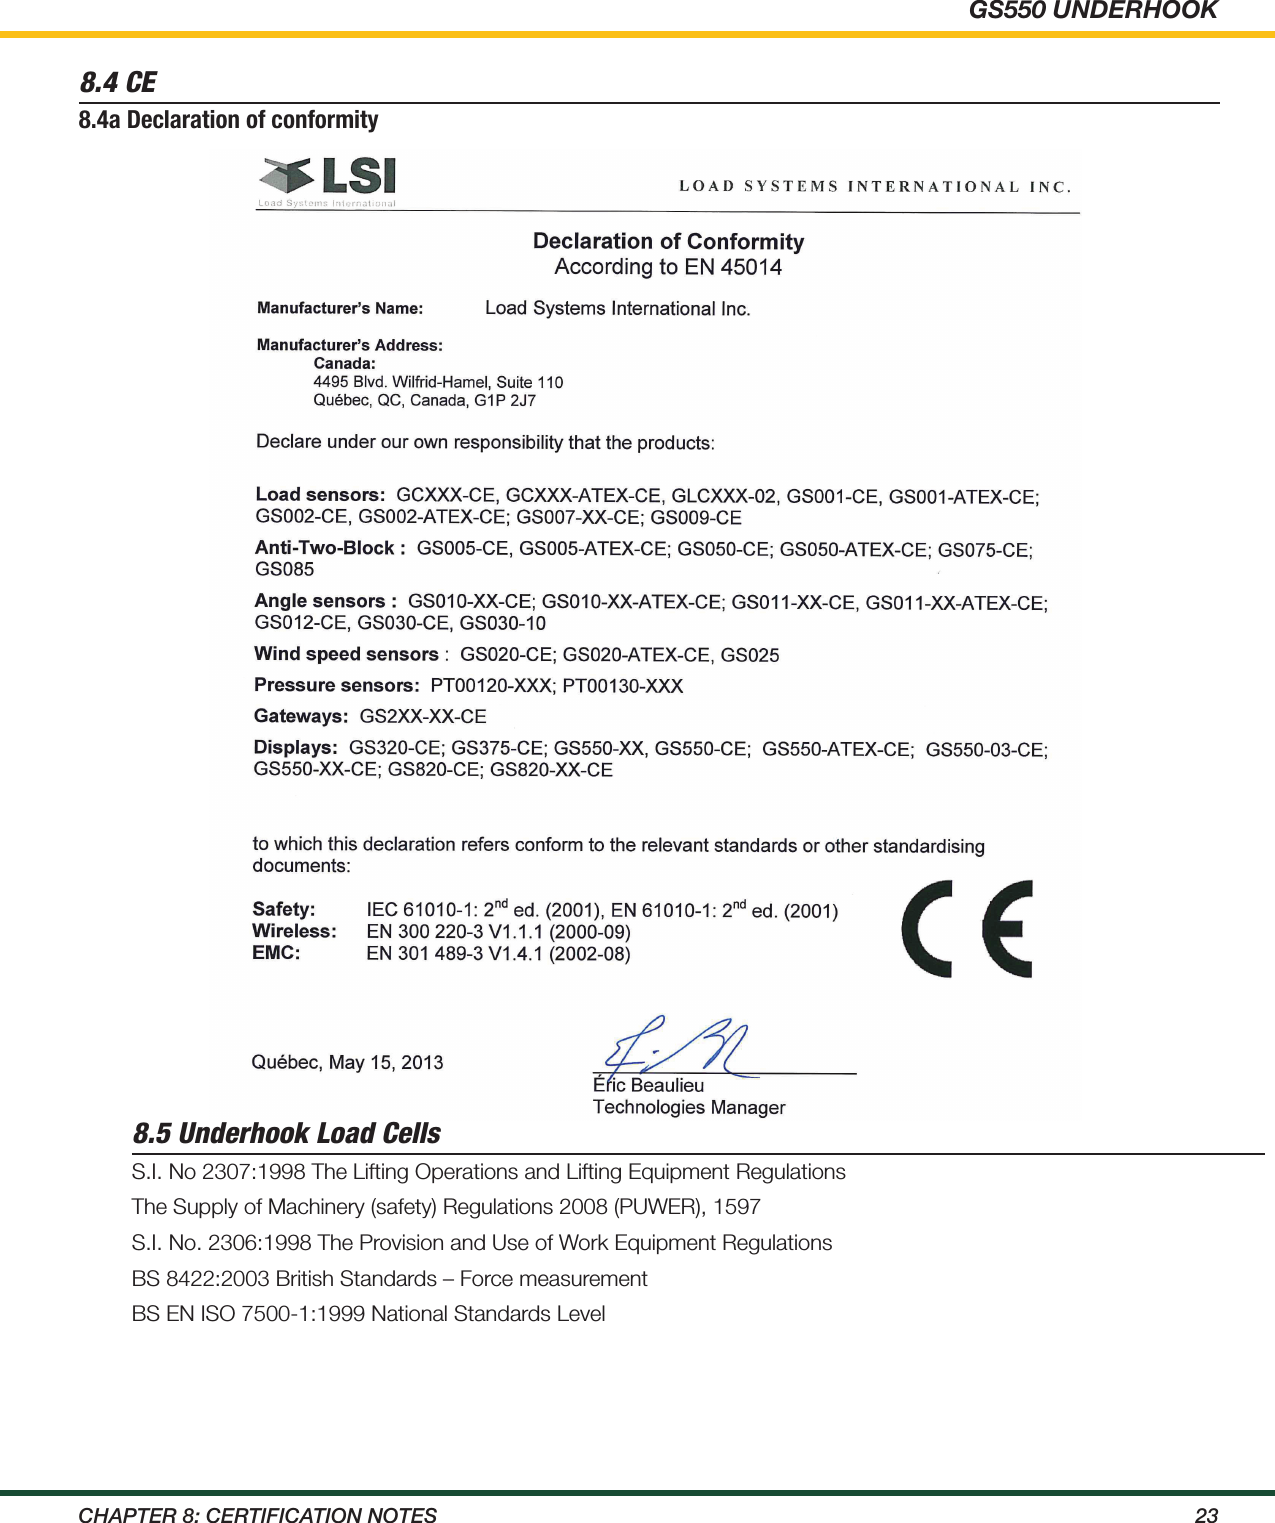 GS550 UNDERHOOK23ChApTEr 8: CErTiFiCATiON NOTES8.4 CE8.4a Declaration of conformity8.5 Underhook Load CellsS.I. No 2307:1998 The Lifting Operations and Lifting Equipment RegulationsThe Supply of Machinery (safety) Regulations 2008 (PUWER), 1597S.I. No. 2306:1998 The Provision and Use of Work Equipment RegulationsBS 8422:2003 British Standards – Force measurementBS EN ISO 7500-1:1999 National Standards Level